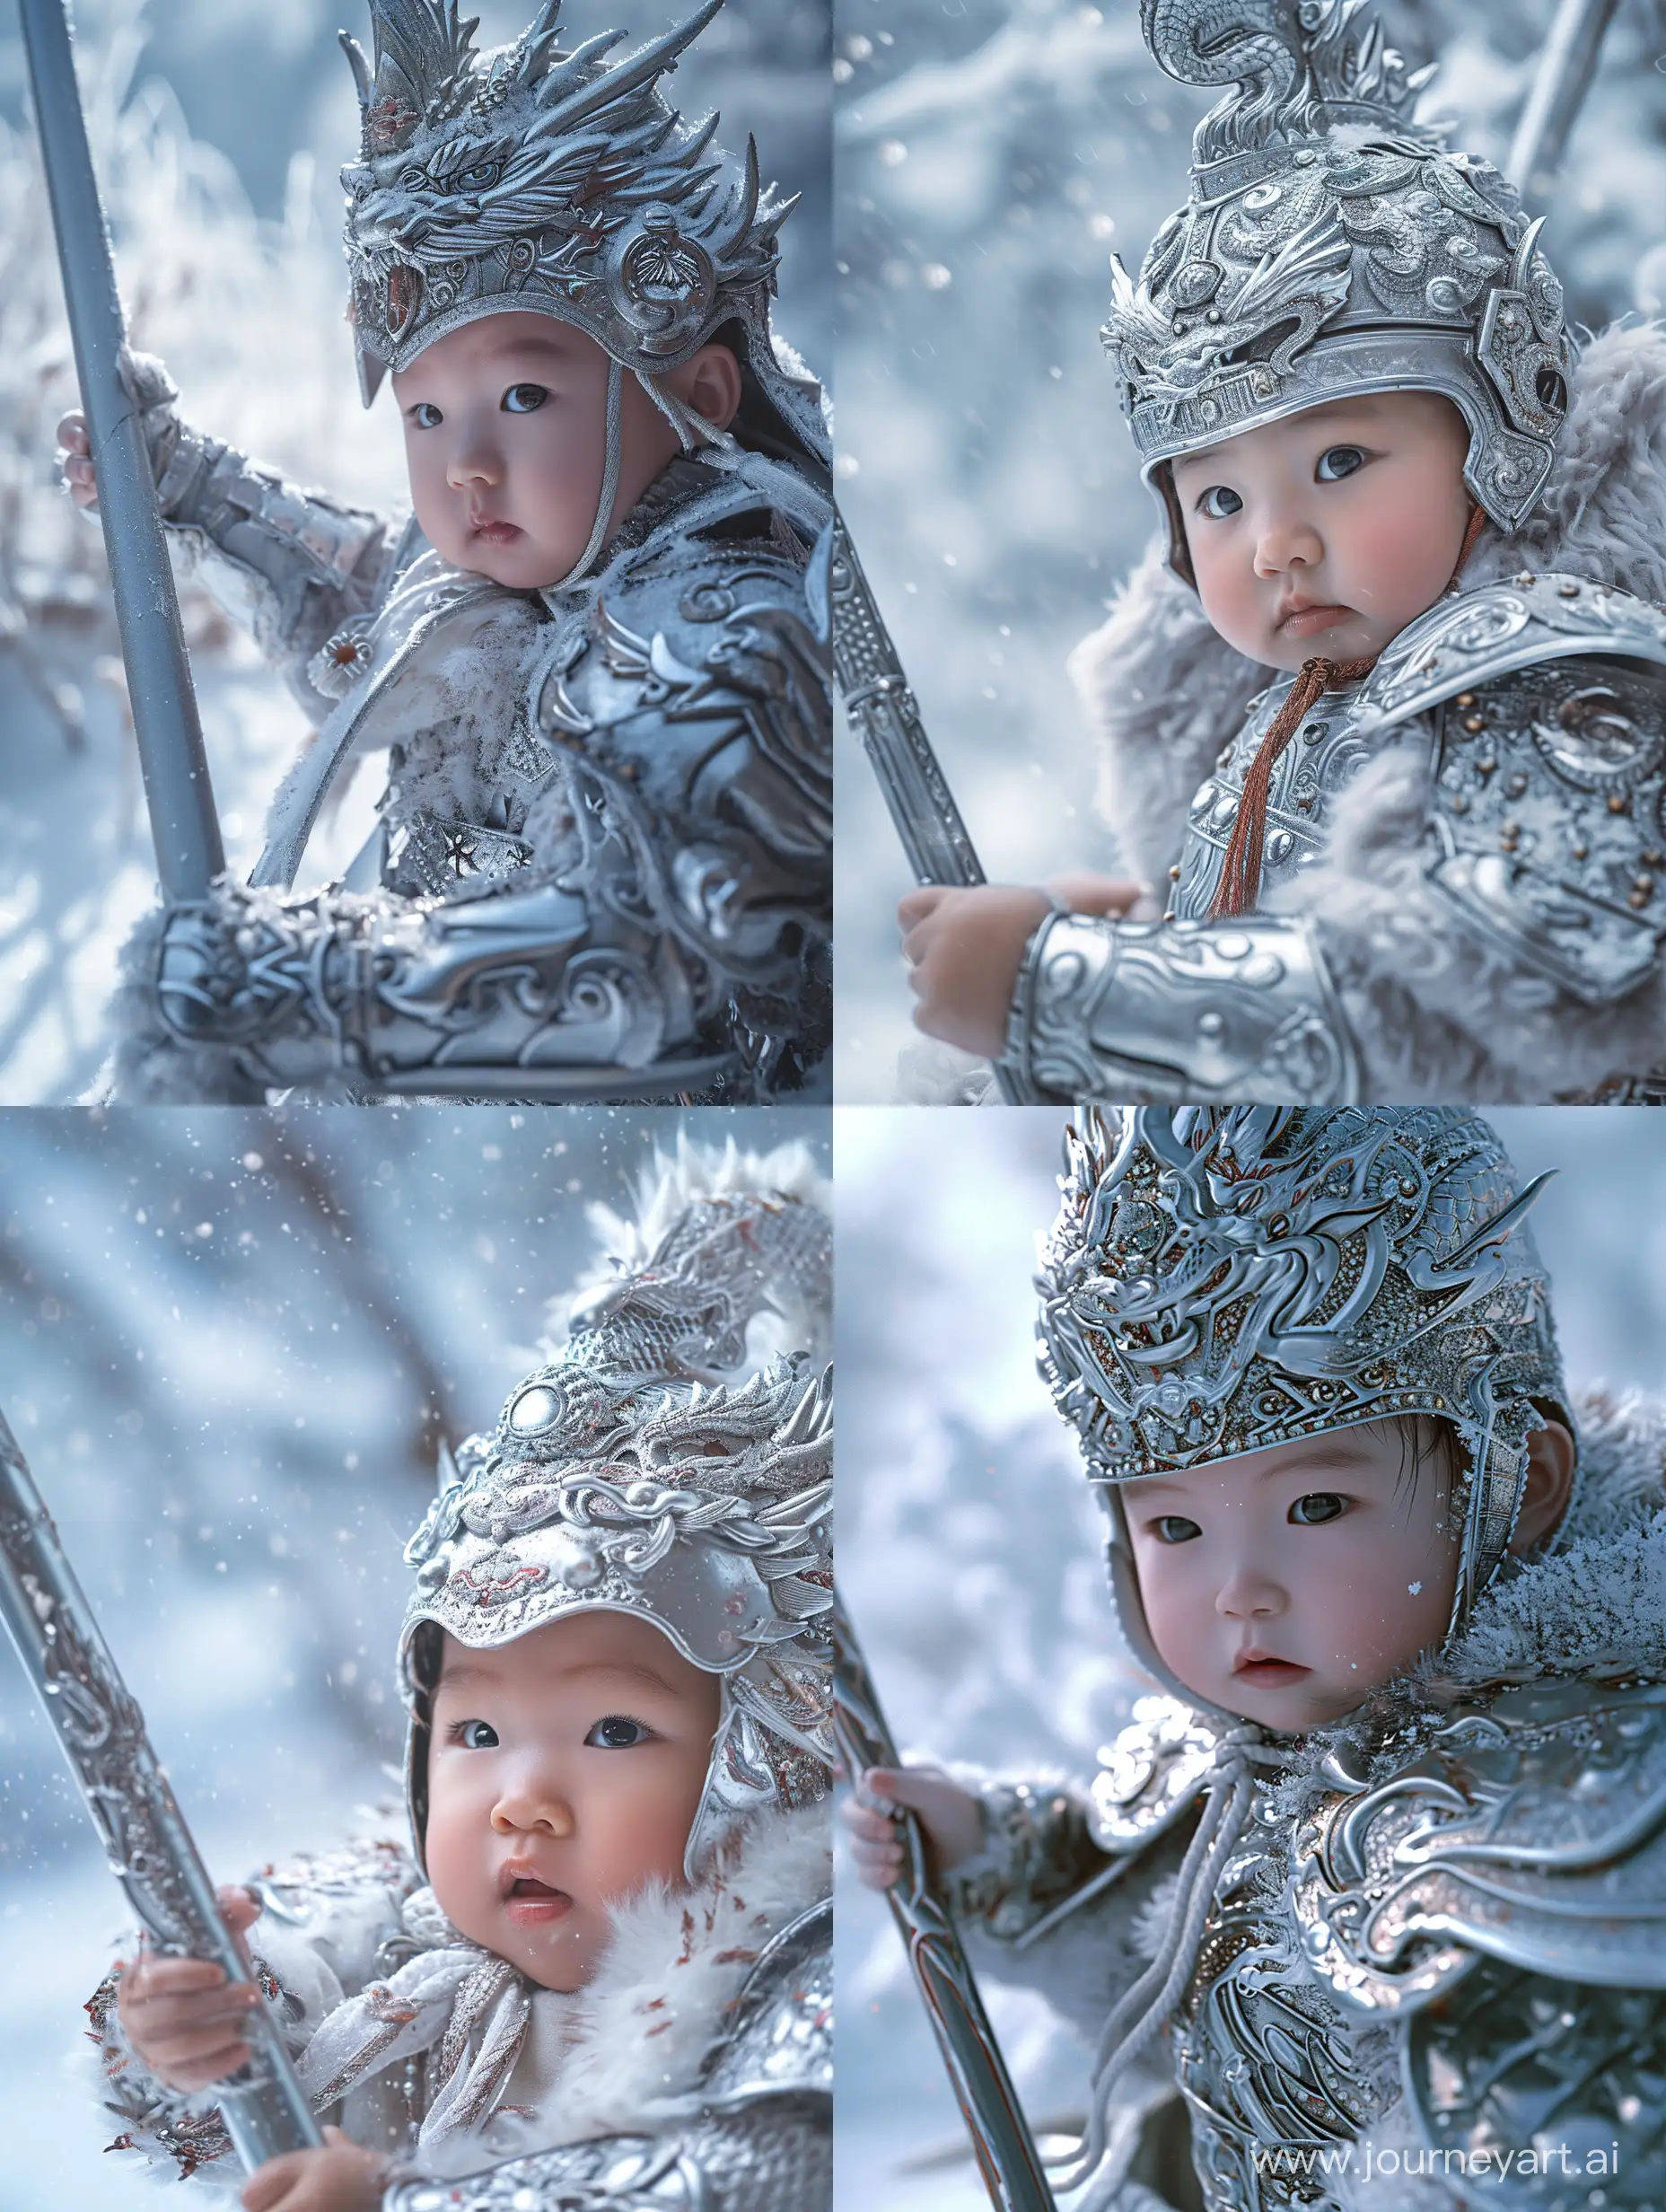 Adorable-Baby-in-General-Zhao-Zilongs-Silver-Armor-with-Dragonpatterned-Helmet